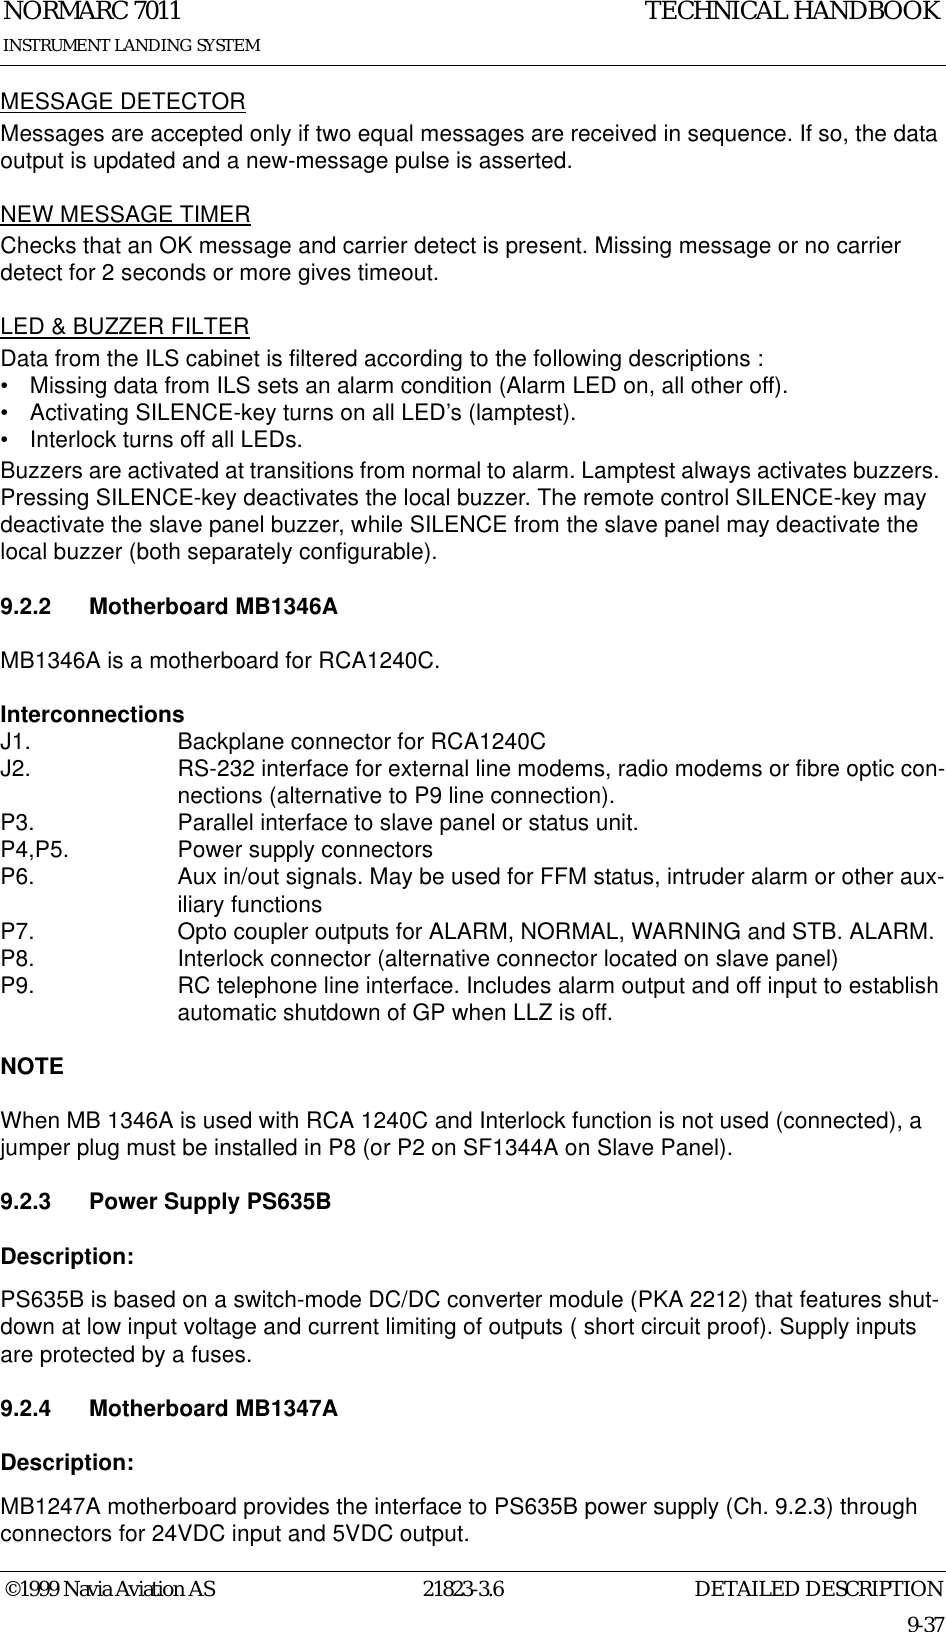 DETAILED DESCRIPTIONNORMARC 701121823-3.69-37INSTRUMENT LANDING SYSTEMTECHNICAL HANDBOOK©1999 Navia Aviation ASMESSAGE DETECTORMessages are accepted only if two equal messages are received in sequence. If so, the data output is updated and a new-message pulse is asserted.NEW MESSAGE TIMERChecks that an OK message and carrier detect is present. Missing message or no carrier detect for 2 seconds or more gives timeout.LED &amp; BUZZER FILTERData from the ILS cabinet is filtered according to the following descriptions :• Missing data from ILS sets an alarm condition (Alarm LED on, all other off).• Activating SILENCE-key turns on all LED’s (lamptest).• Interlock turns off all LEDs.Buzzers are activated at transitions from normal to alarm. Lamptest always activates buzzers. Pressing SILENCE-key deactivates the local buzzer. The remote control SILENCE-key may deactivate the slave panel buzzer, while SILENCE from the slave panel may deactivate the local buzzer (both separately configurable).9.2.2 Motherboard MB1346A MB1346A is a motherboard for RCA1240C. InterconnectionsJ1.  Backplane connector for RCA1240CJ2.  RS-232 interface for external line modems, radio modems or fibre optic con-nections (alternative to P9 line connection).P3.  Parallel interface to slave panel or status unit.P4,P5. Power supply connectorsP6.  Aux in/out signals. May be used for FFM status, intruder alarm or other aux-iliary functionsP7.  Opto coupler outputs for ALARM, NORMAL, WARNING and STB. ALARM.P8.  Interlock connector (alternative connector located on slave panel) P9.  RC telephone line interface. Includes alarm output and off input to establish automatic shutdown of GP when LLZ is off.NOTEWhen MB 1346A is used with RCA 1240C and Interlock function is not used (connected), a jumper plug must be installed in P8 (or P2 on SF1344A on Slave Panel).9.2.3 Power Supply PS635BDescription:PS635B is based on a switch-mode DC/DC converter module (PKA 2212) that features shut-down at low input voltage and current limiting of outputs ( short circuit proof). Supply inputs are protected by a fuses.9.2.4 Motherboard MB1347ADescription:MB1247A motherboard provides the interface to PS635B power supply (Ch. 9.2.3) through connectors for 24VDC input and 5VDC output.